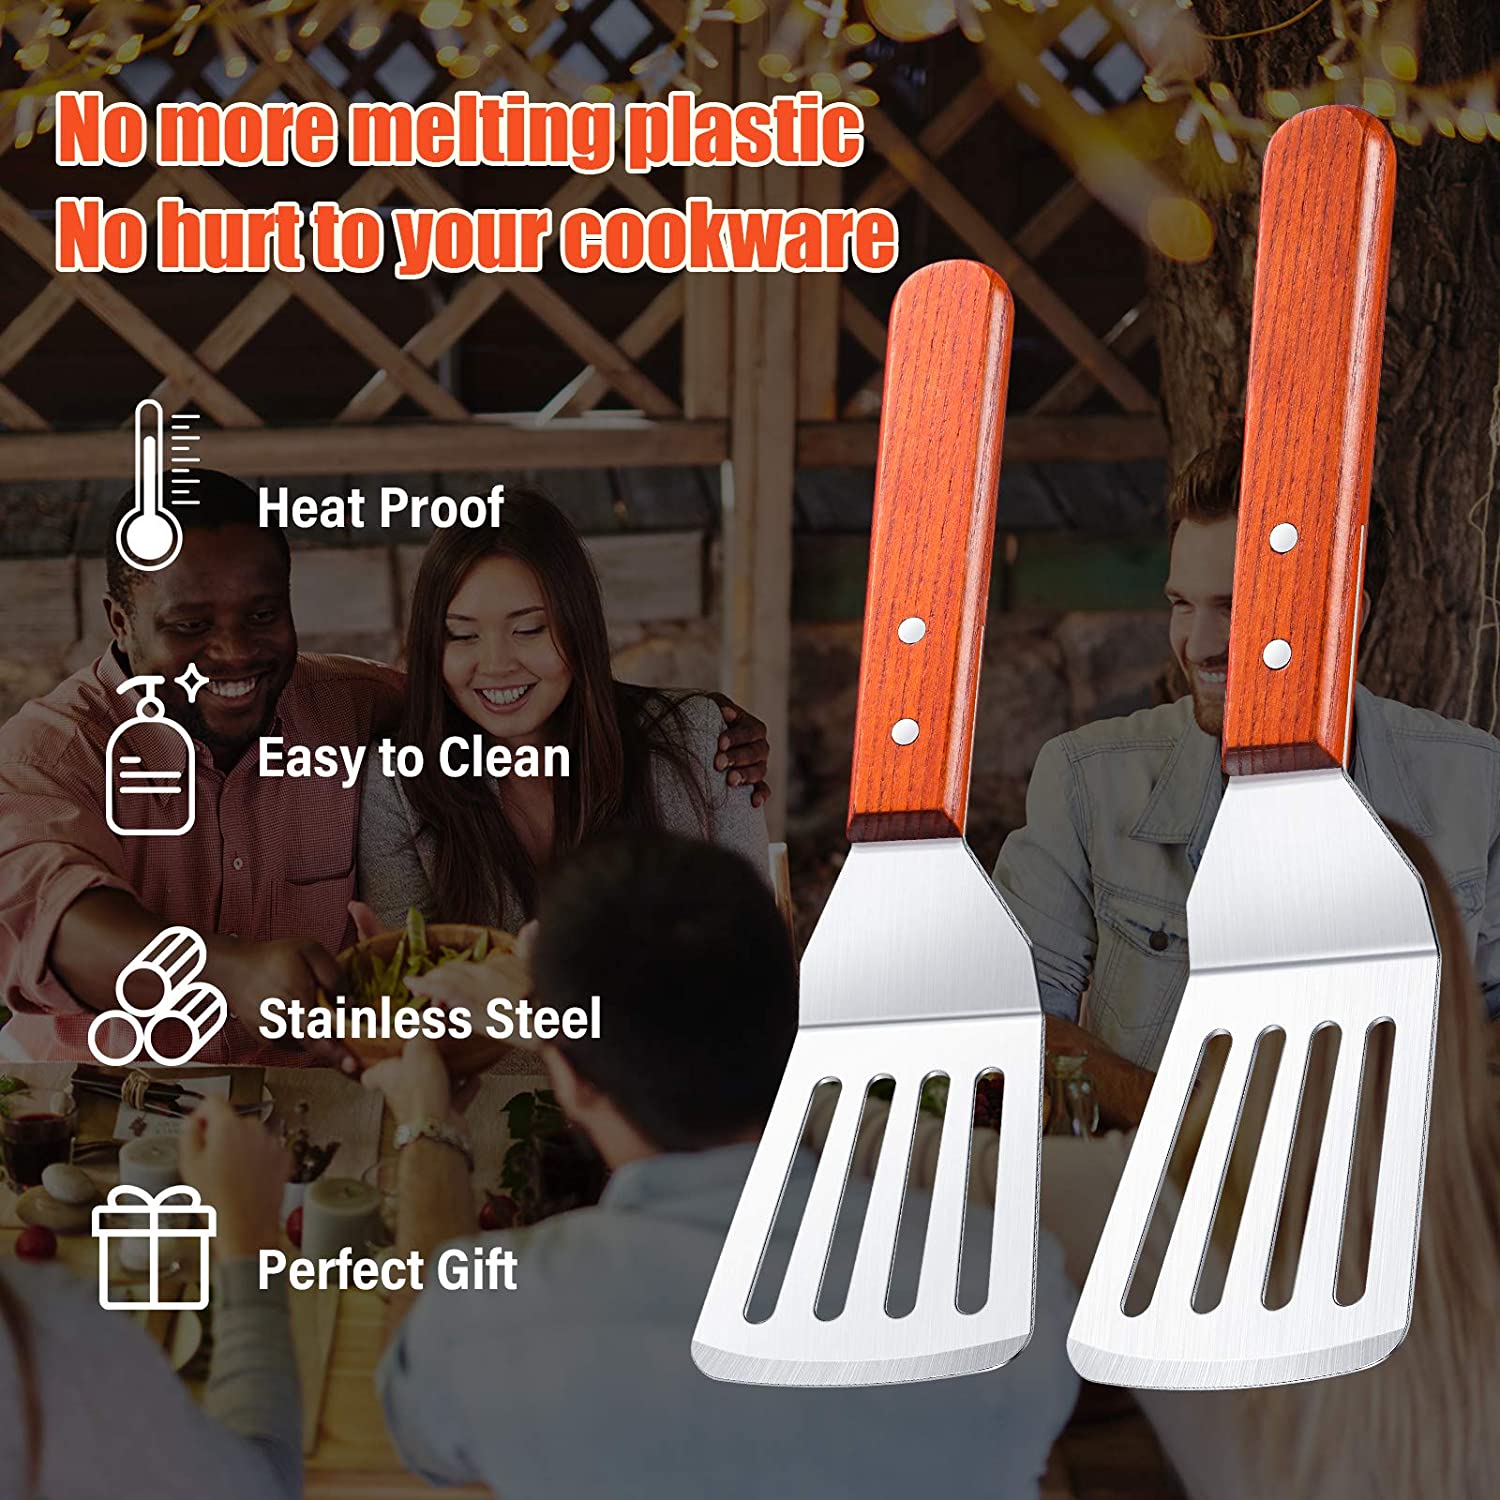 2 Pieces Slotted Fish Spatulas with Wooden Handle and Stainless Steel Wide Thin Kitchen Cooking Spatula Turner Beveled Edge Curved Spatula for Grilling Frying Cooking